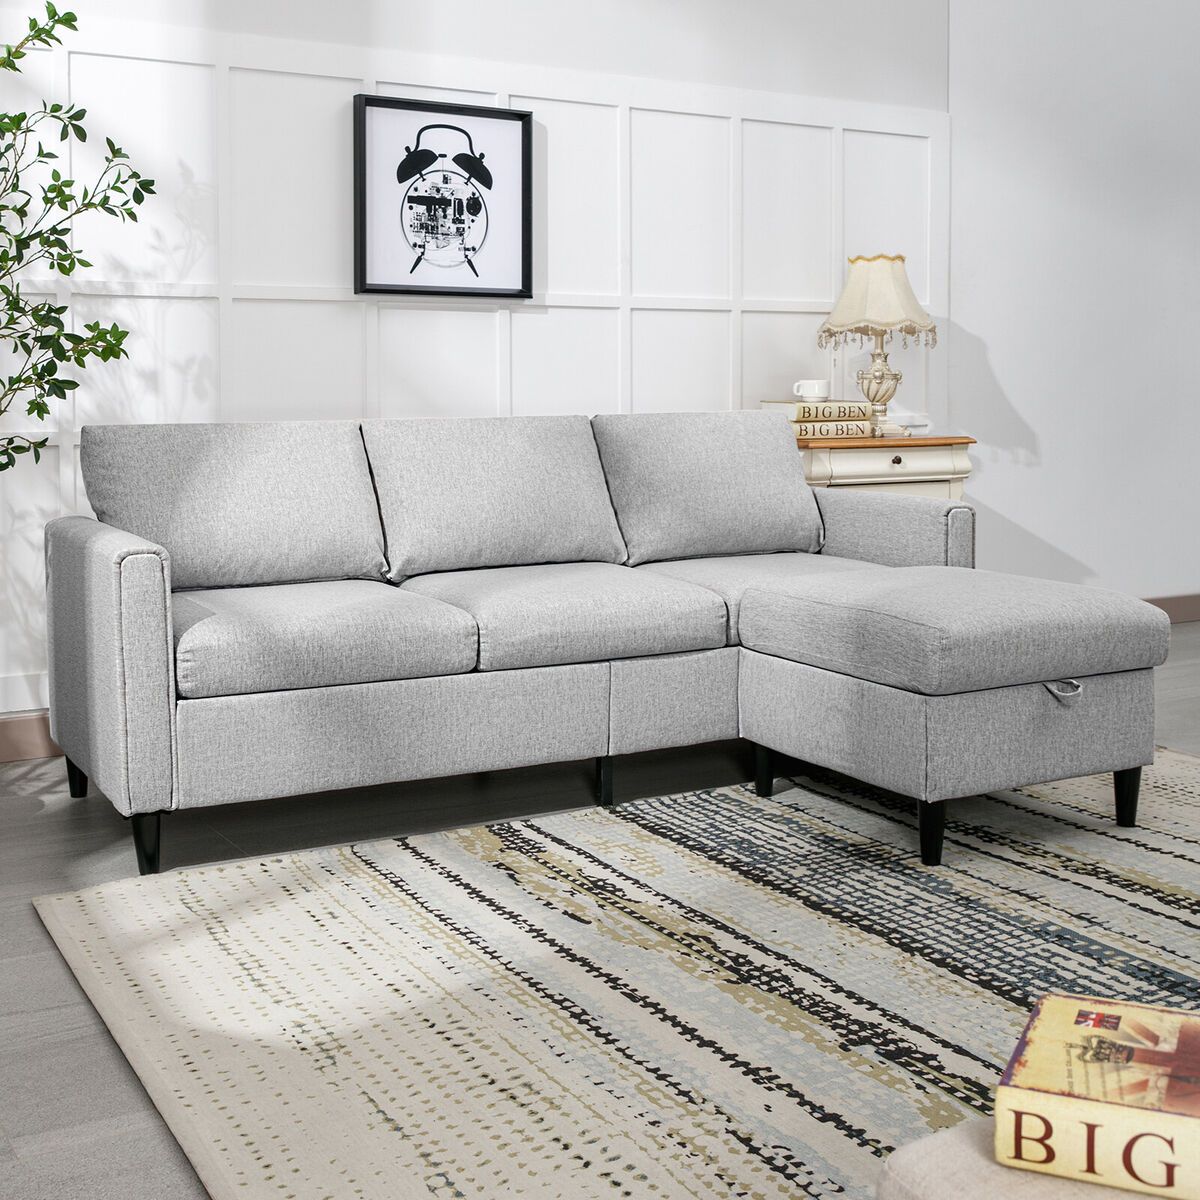 Small Convertible Sectional Sofa Couch, 77"L Shape Sofa With Storage  Ottoman | Ebay For Convertible L Shaped Sectional Sofas (View 3 of 15)